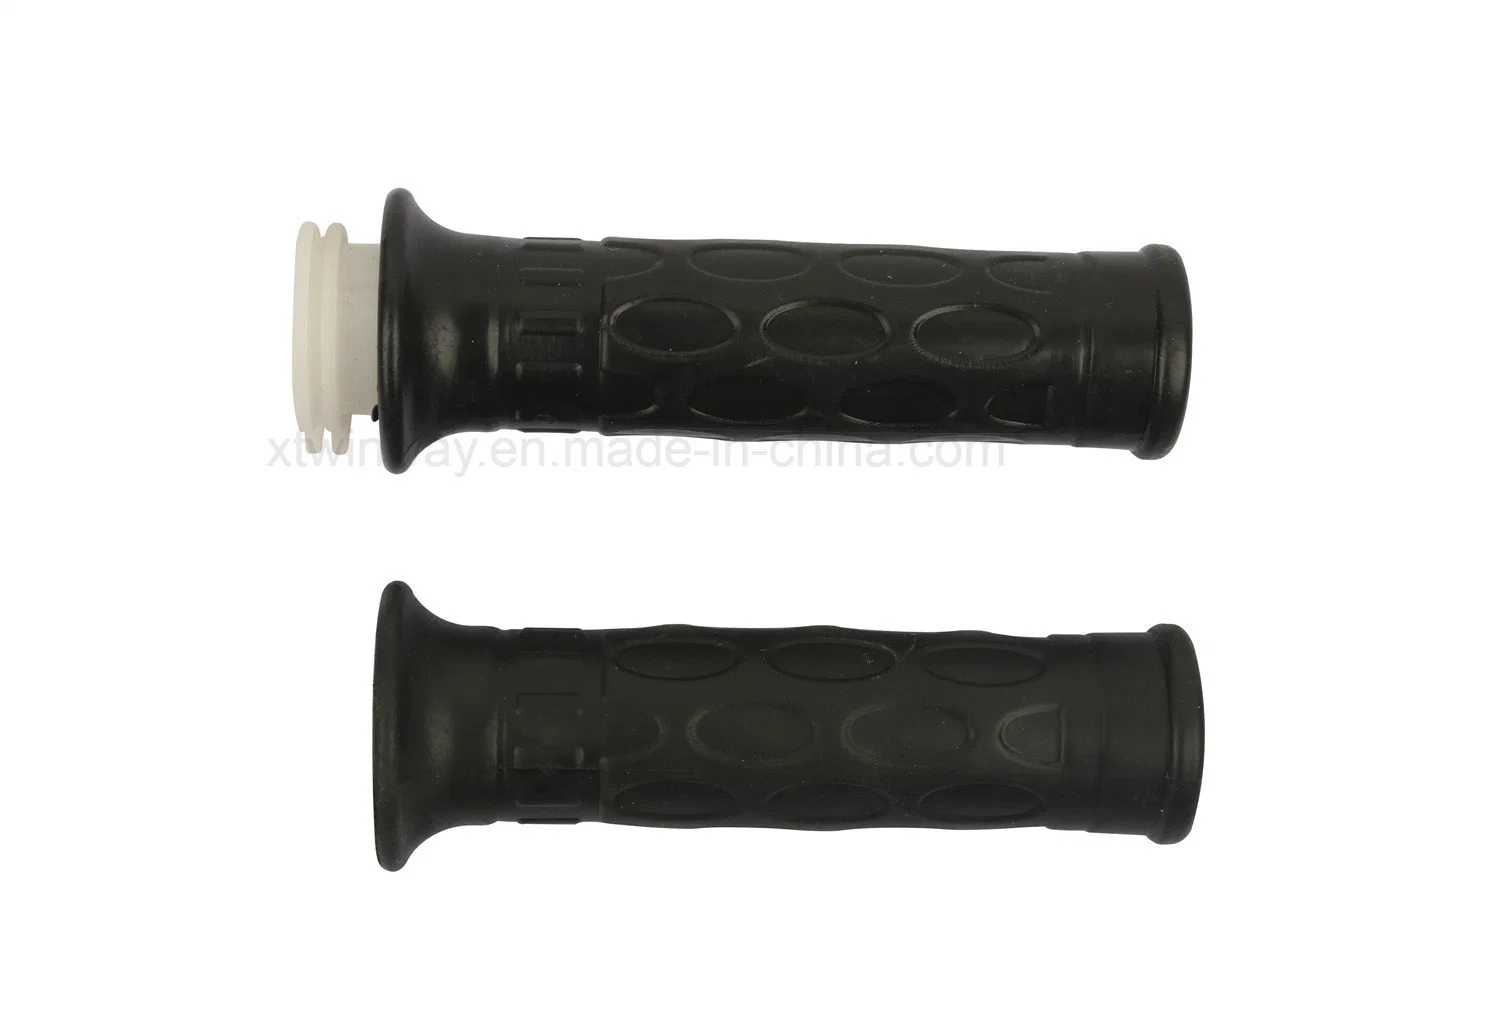 Ww-8303 Motorcycle Parts Handle Grip Motorcycle Grip for Tvs